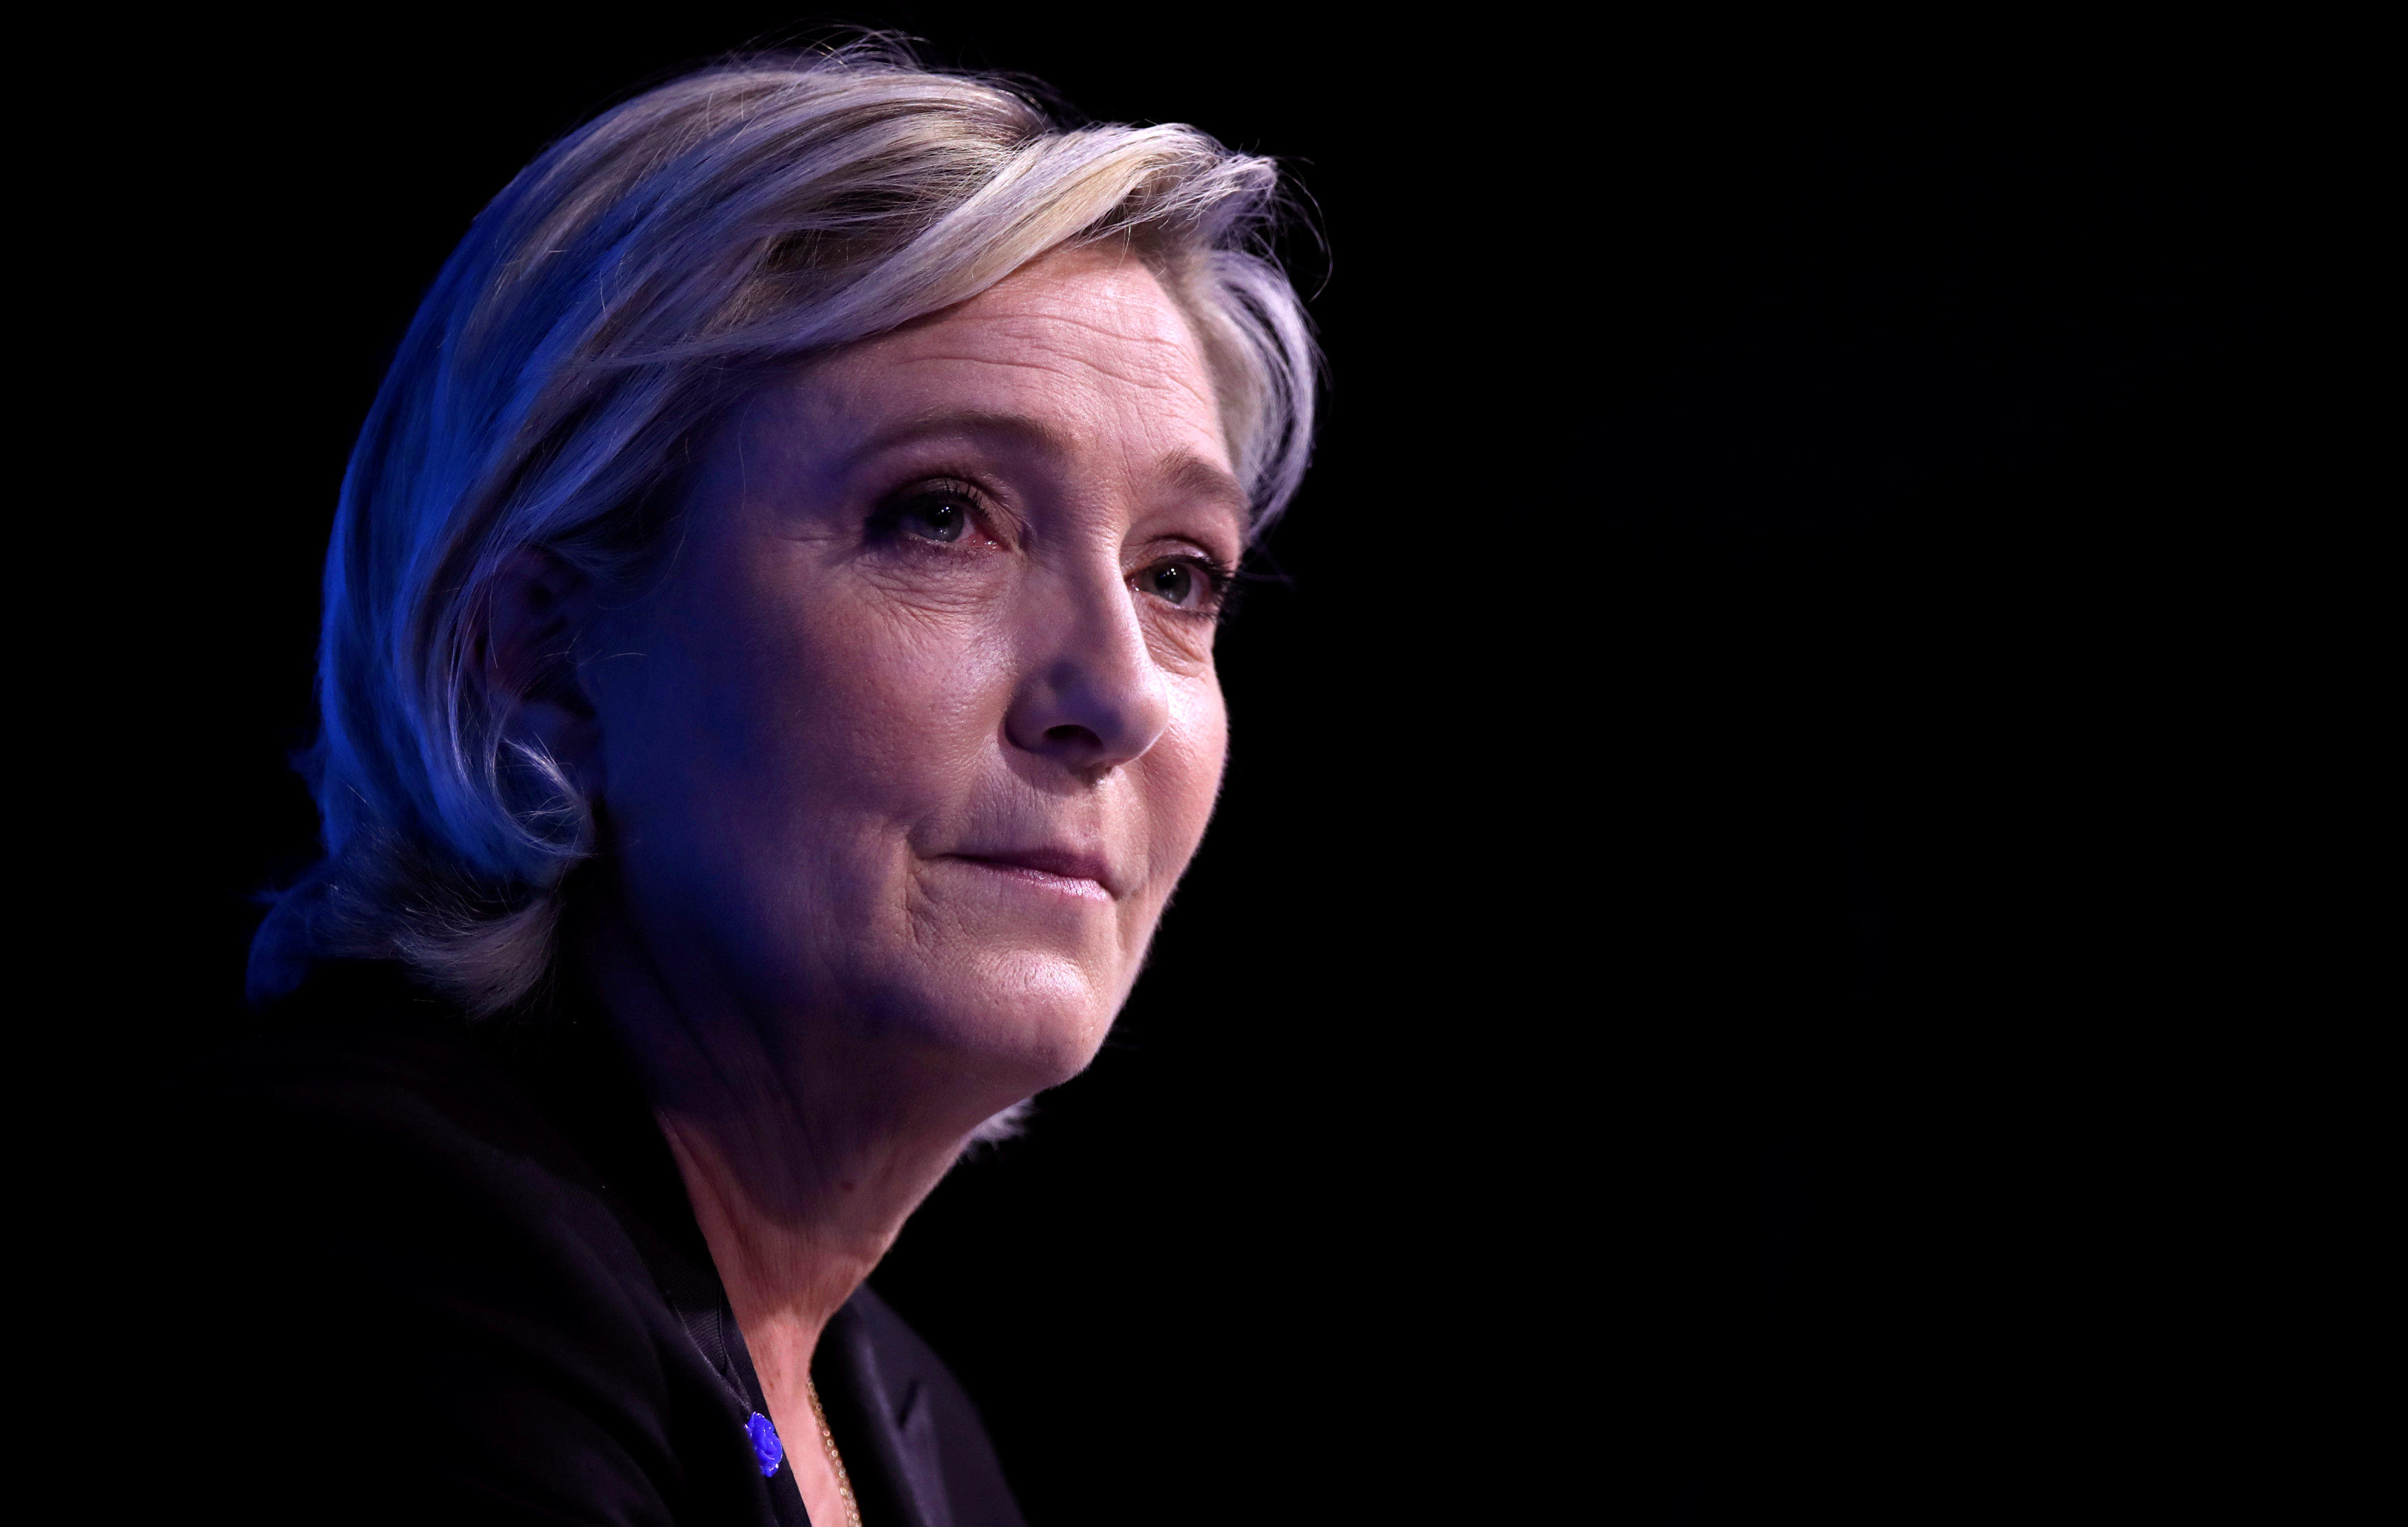 I Believe in France”: An Interview with Marine Le Pen ━ The